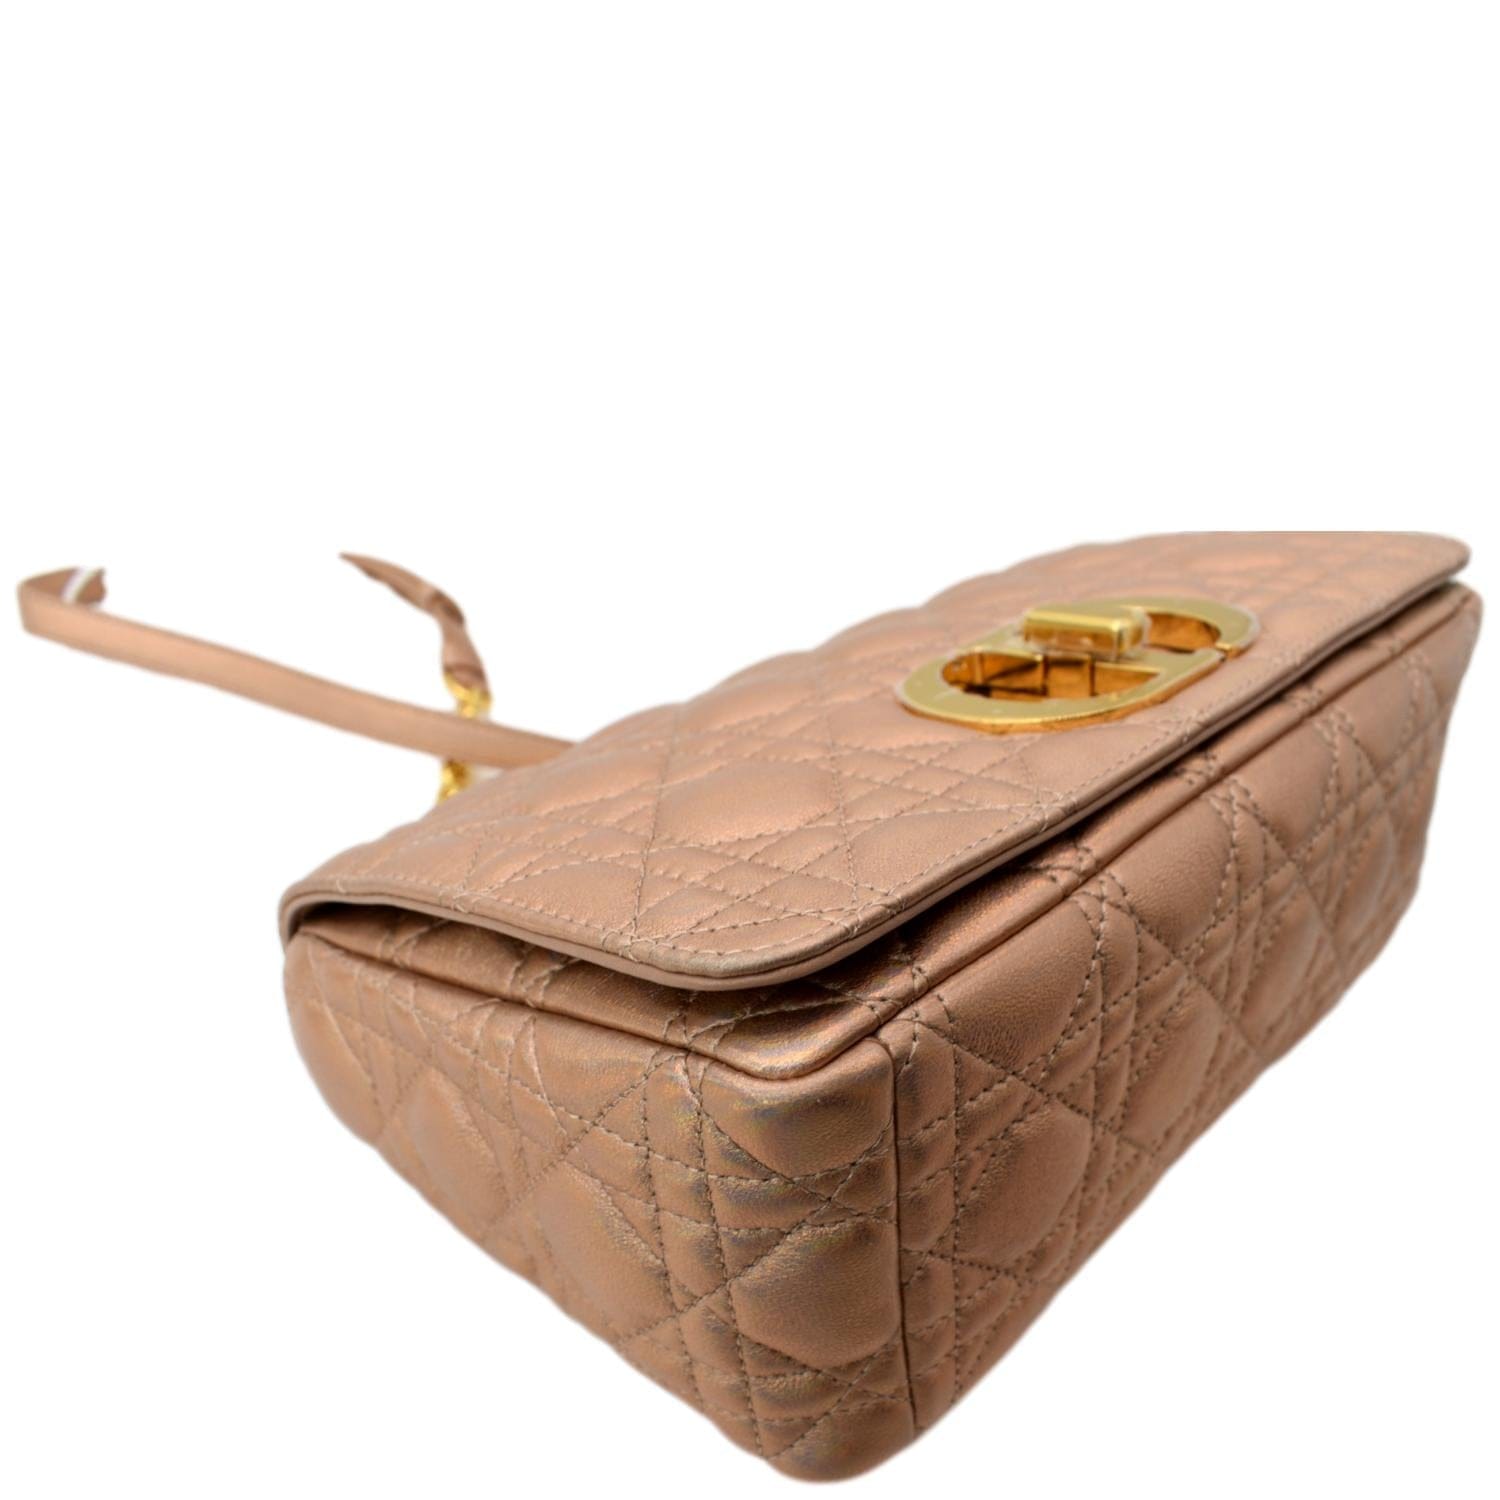 Light brown suede leather with gold-tone metal classic shoulder